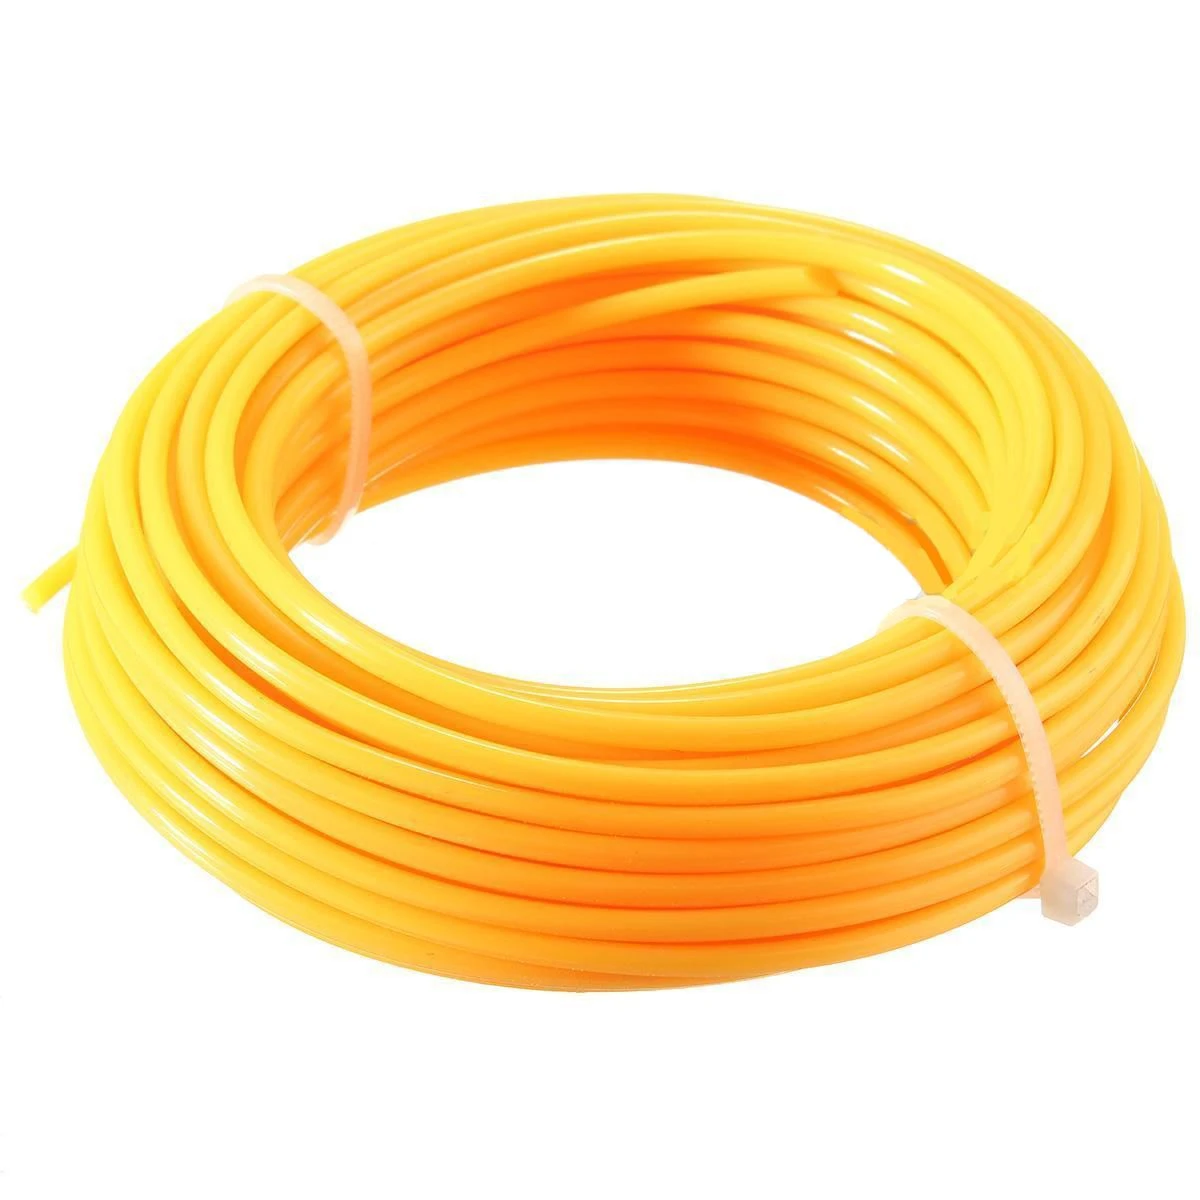 2.4mm*15m Strong Strimmer Line Spool Nylon Cord Wire String Grass Trimmer Head Line For Grass Cutter